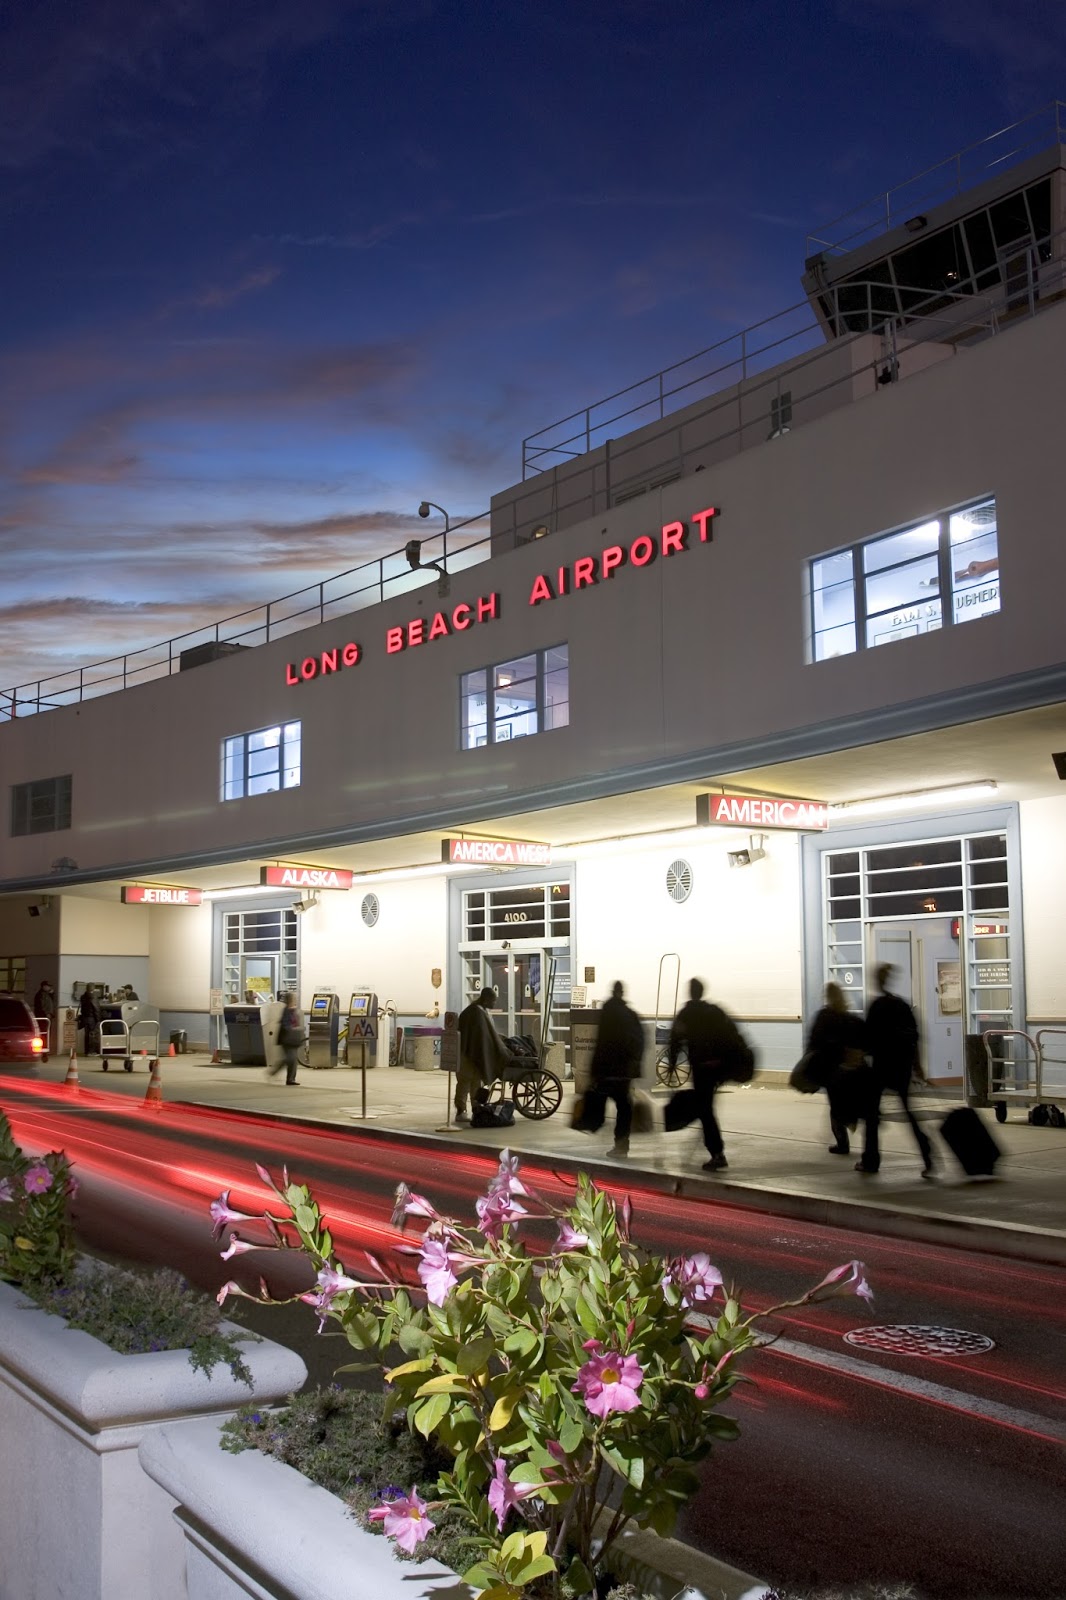 Long Beach Airport Recognized by Esteemed Publications in the Same Week